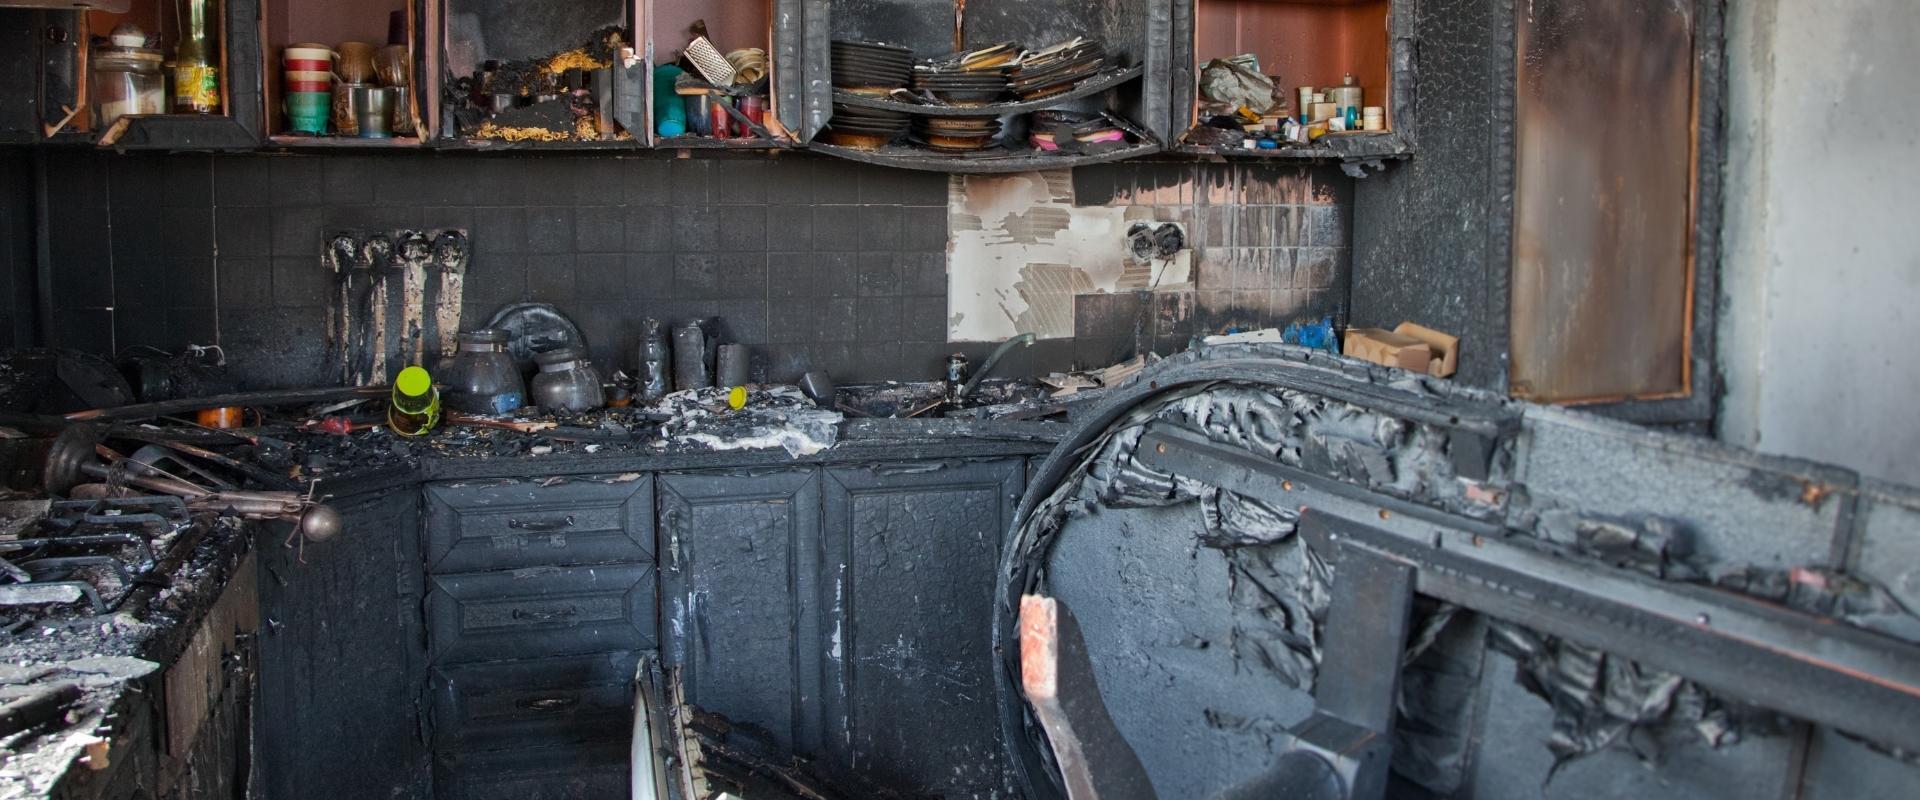 Alconero and Associates - Fire damage in Miami is a typical occurrence. As a homeowner, having fire insurance is essential if you want to avoid experiencing collateral damage